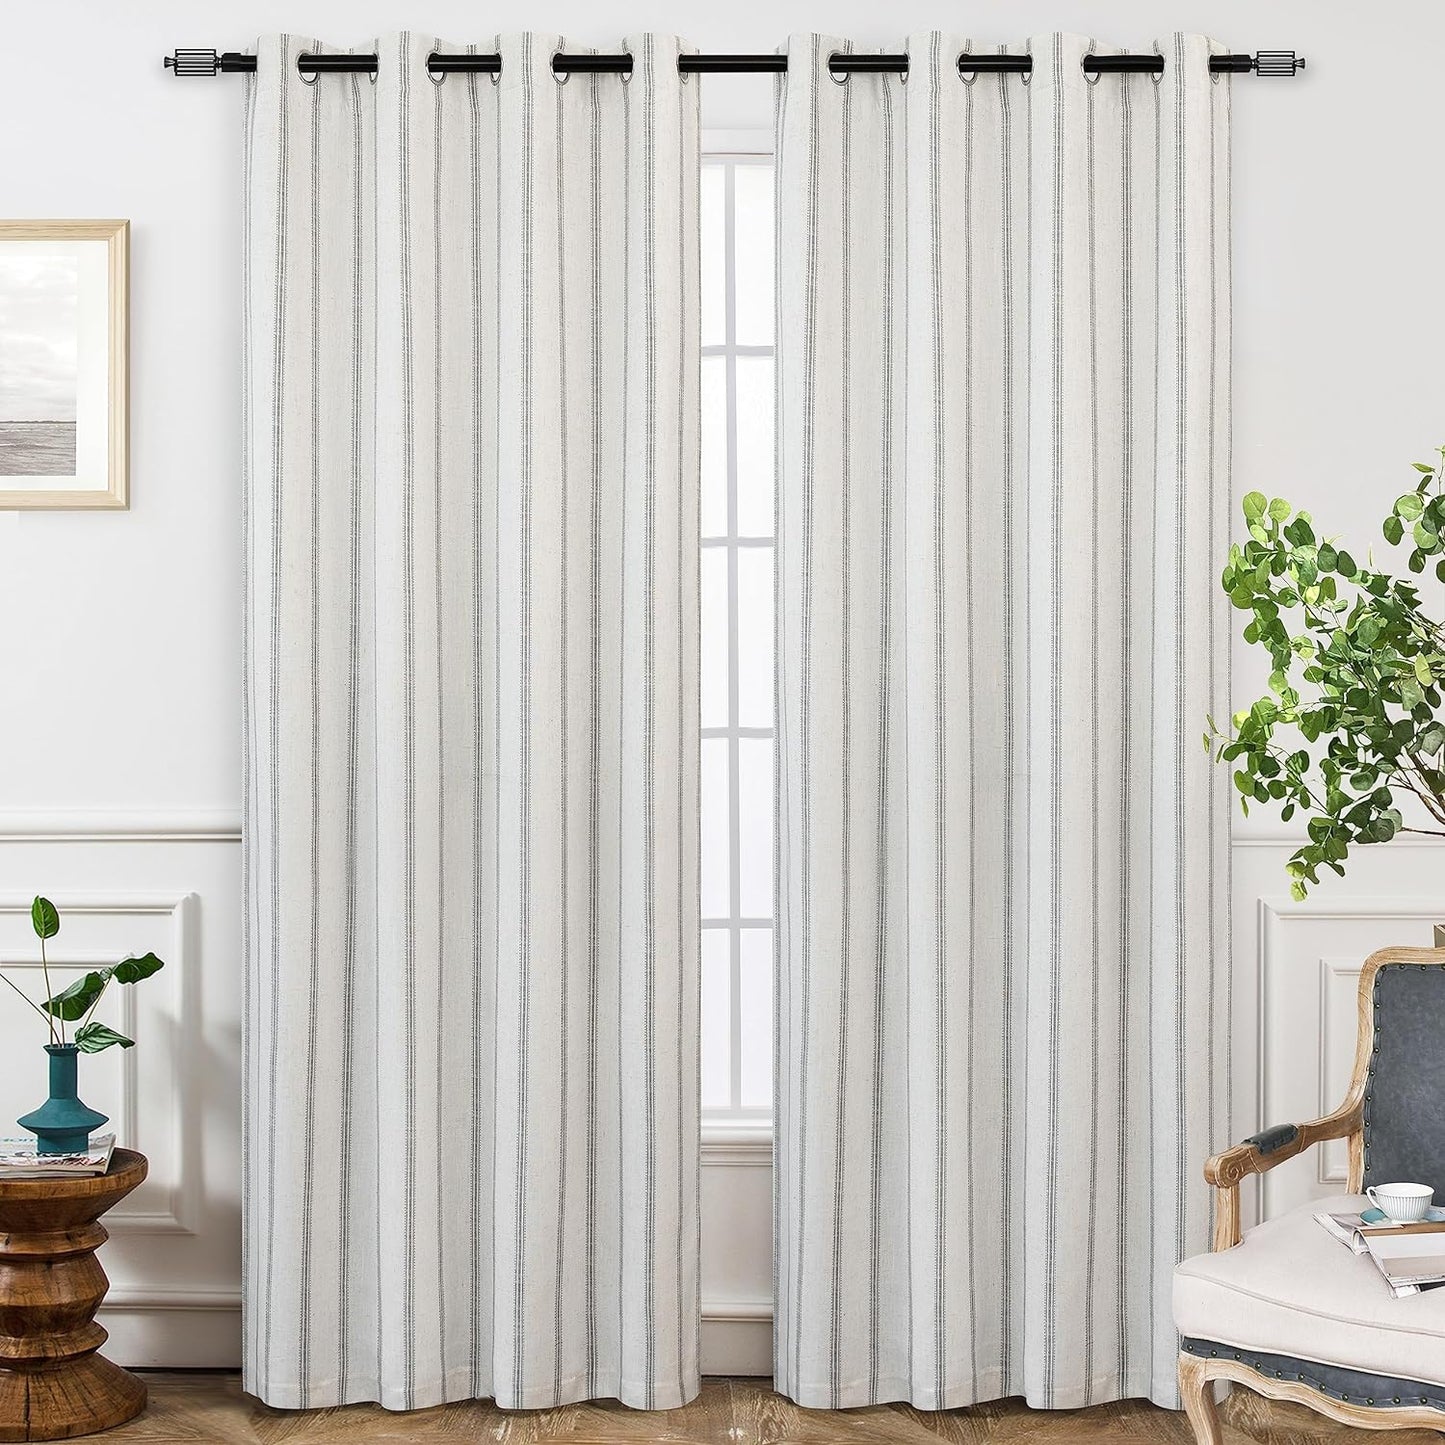 Driftaway Farmhouse Linen Blend Blackout Curtains 84 Inches Long for Bedroom Vertical Striped Printed Linen Curtains Thermal Insulated Grommet Lined Treatments for Living Room 2 Panels W52 X L84 Grey  DriftAway Grey 50"X102" 